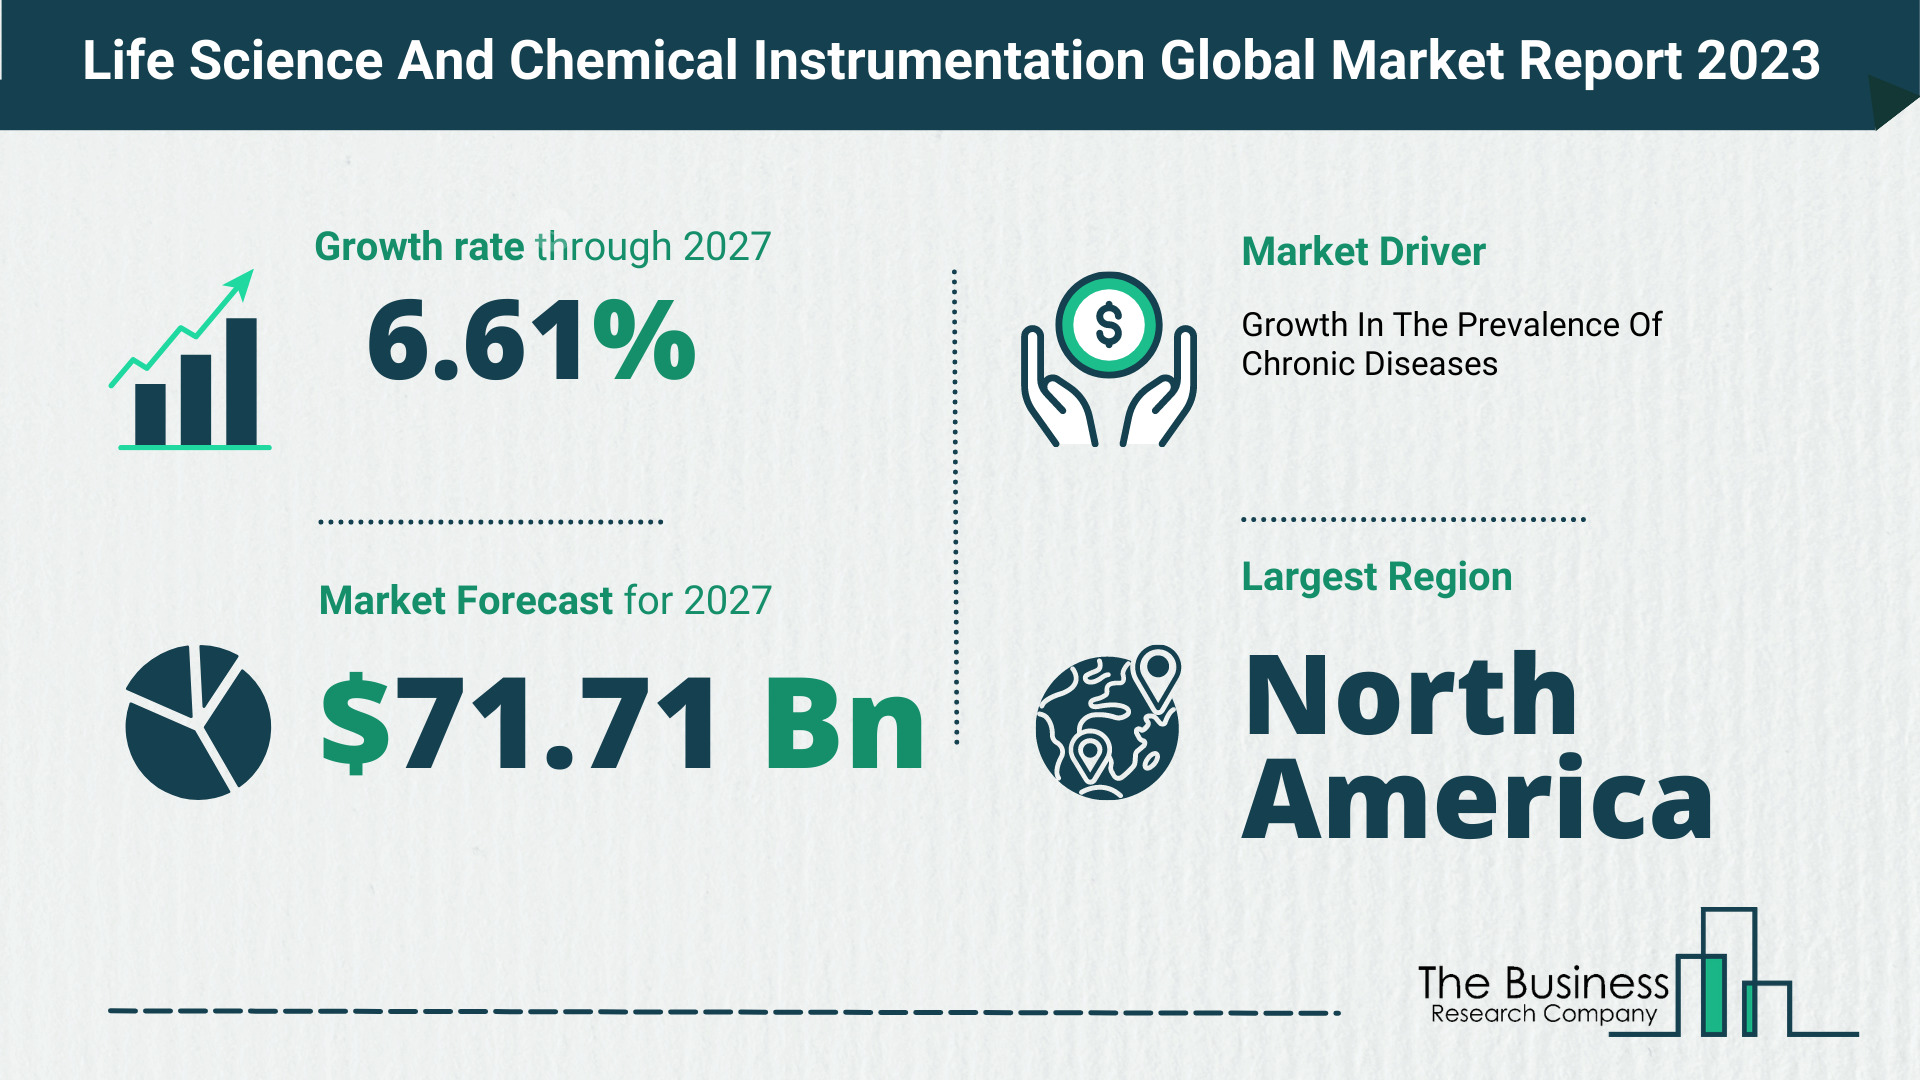 Life Science And Chemical Instrumentation Market Size, Share, And Growth Rate Analysis 2023